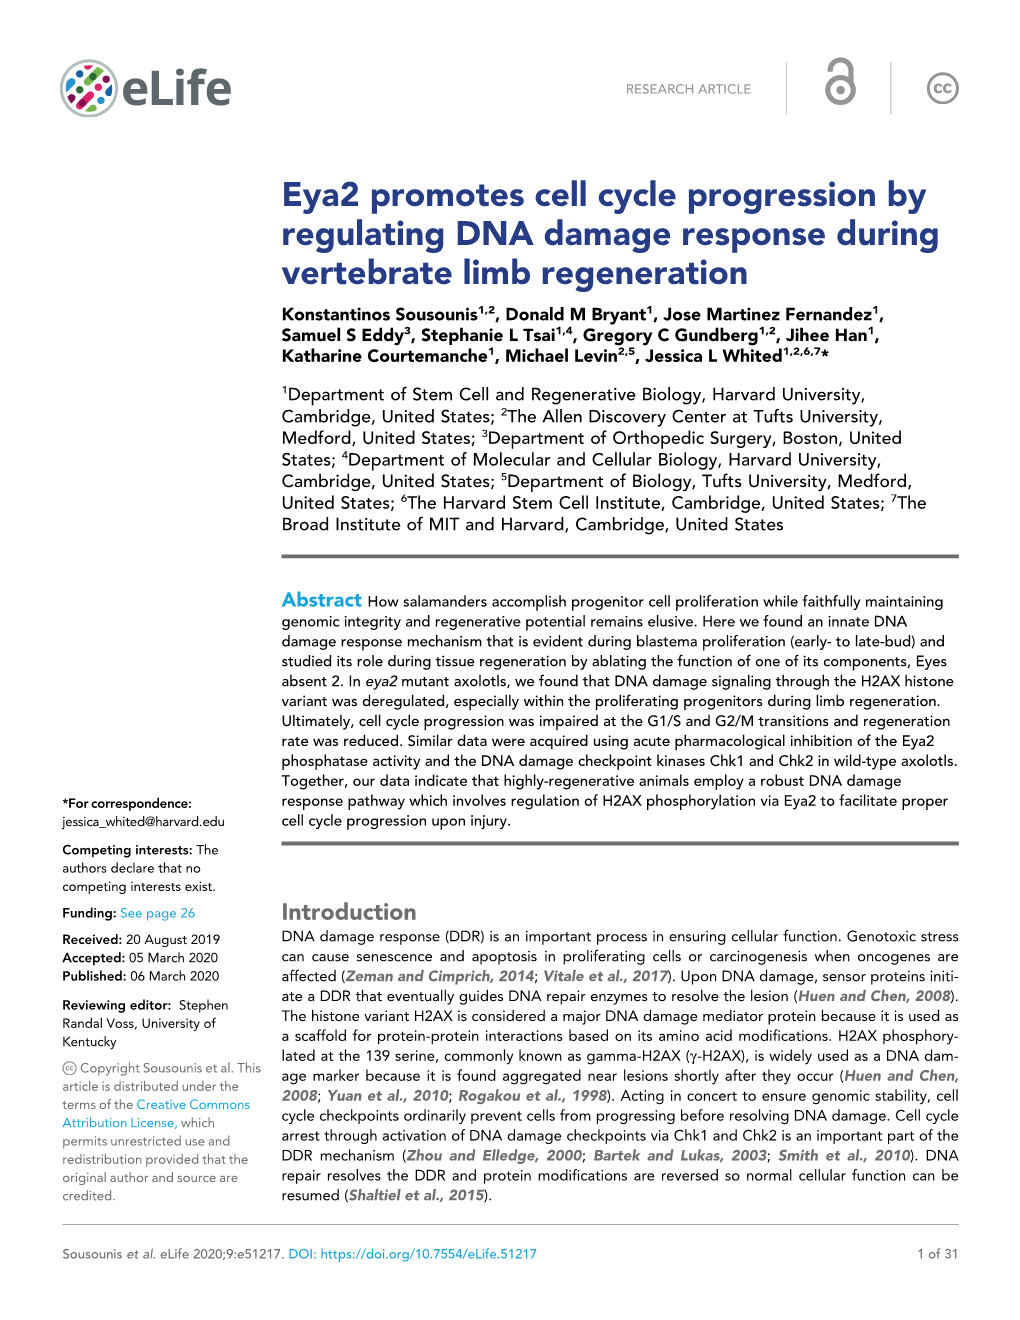 Eya2 Promotes Cell Cycle Progression by Regulating DNA Damage